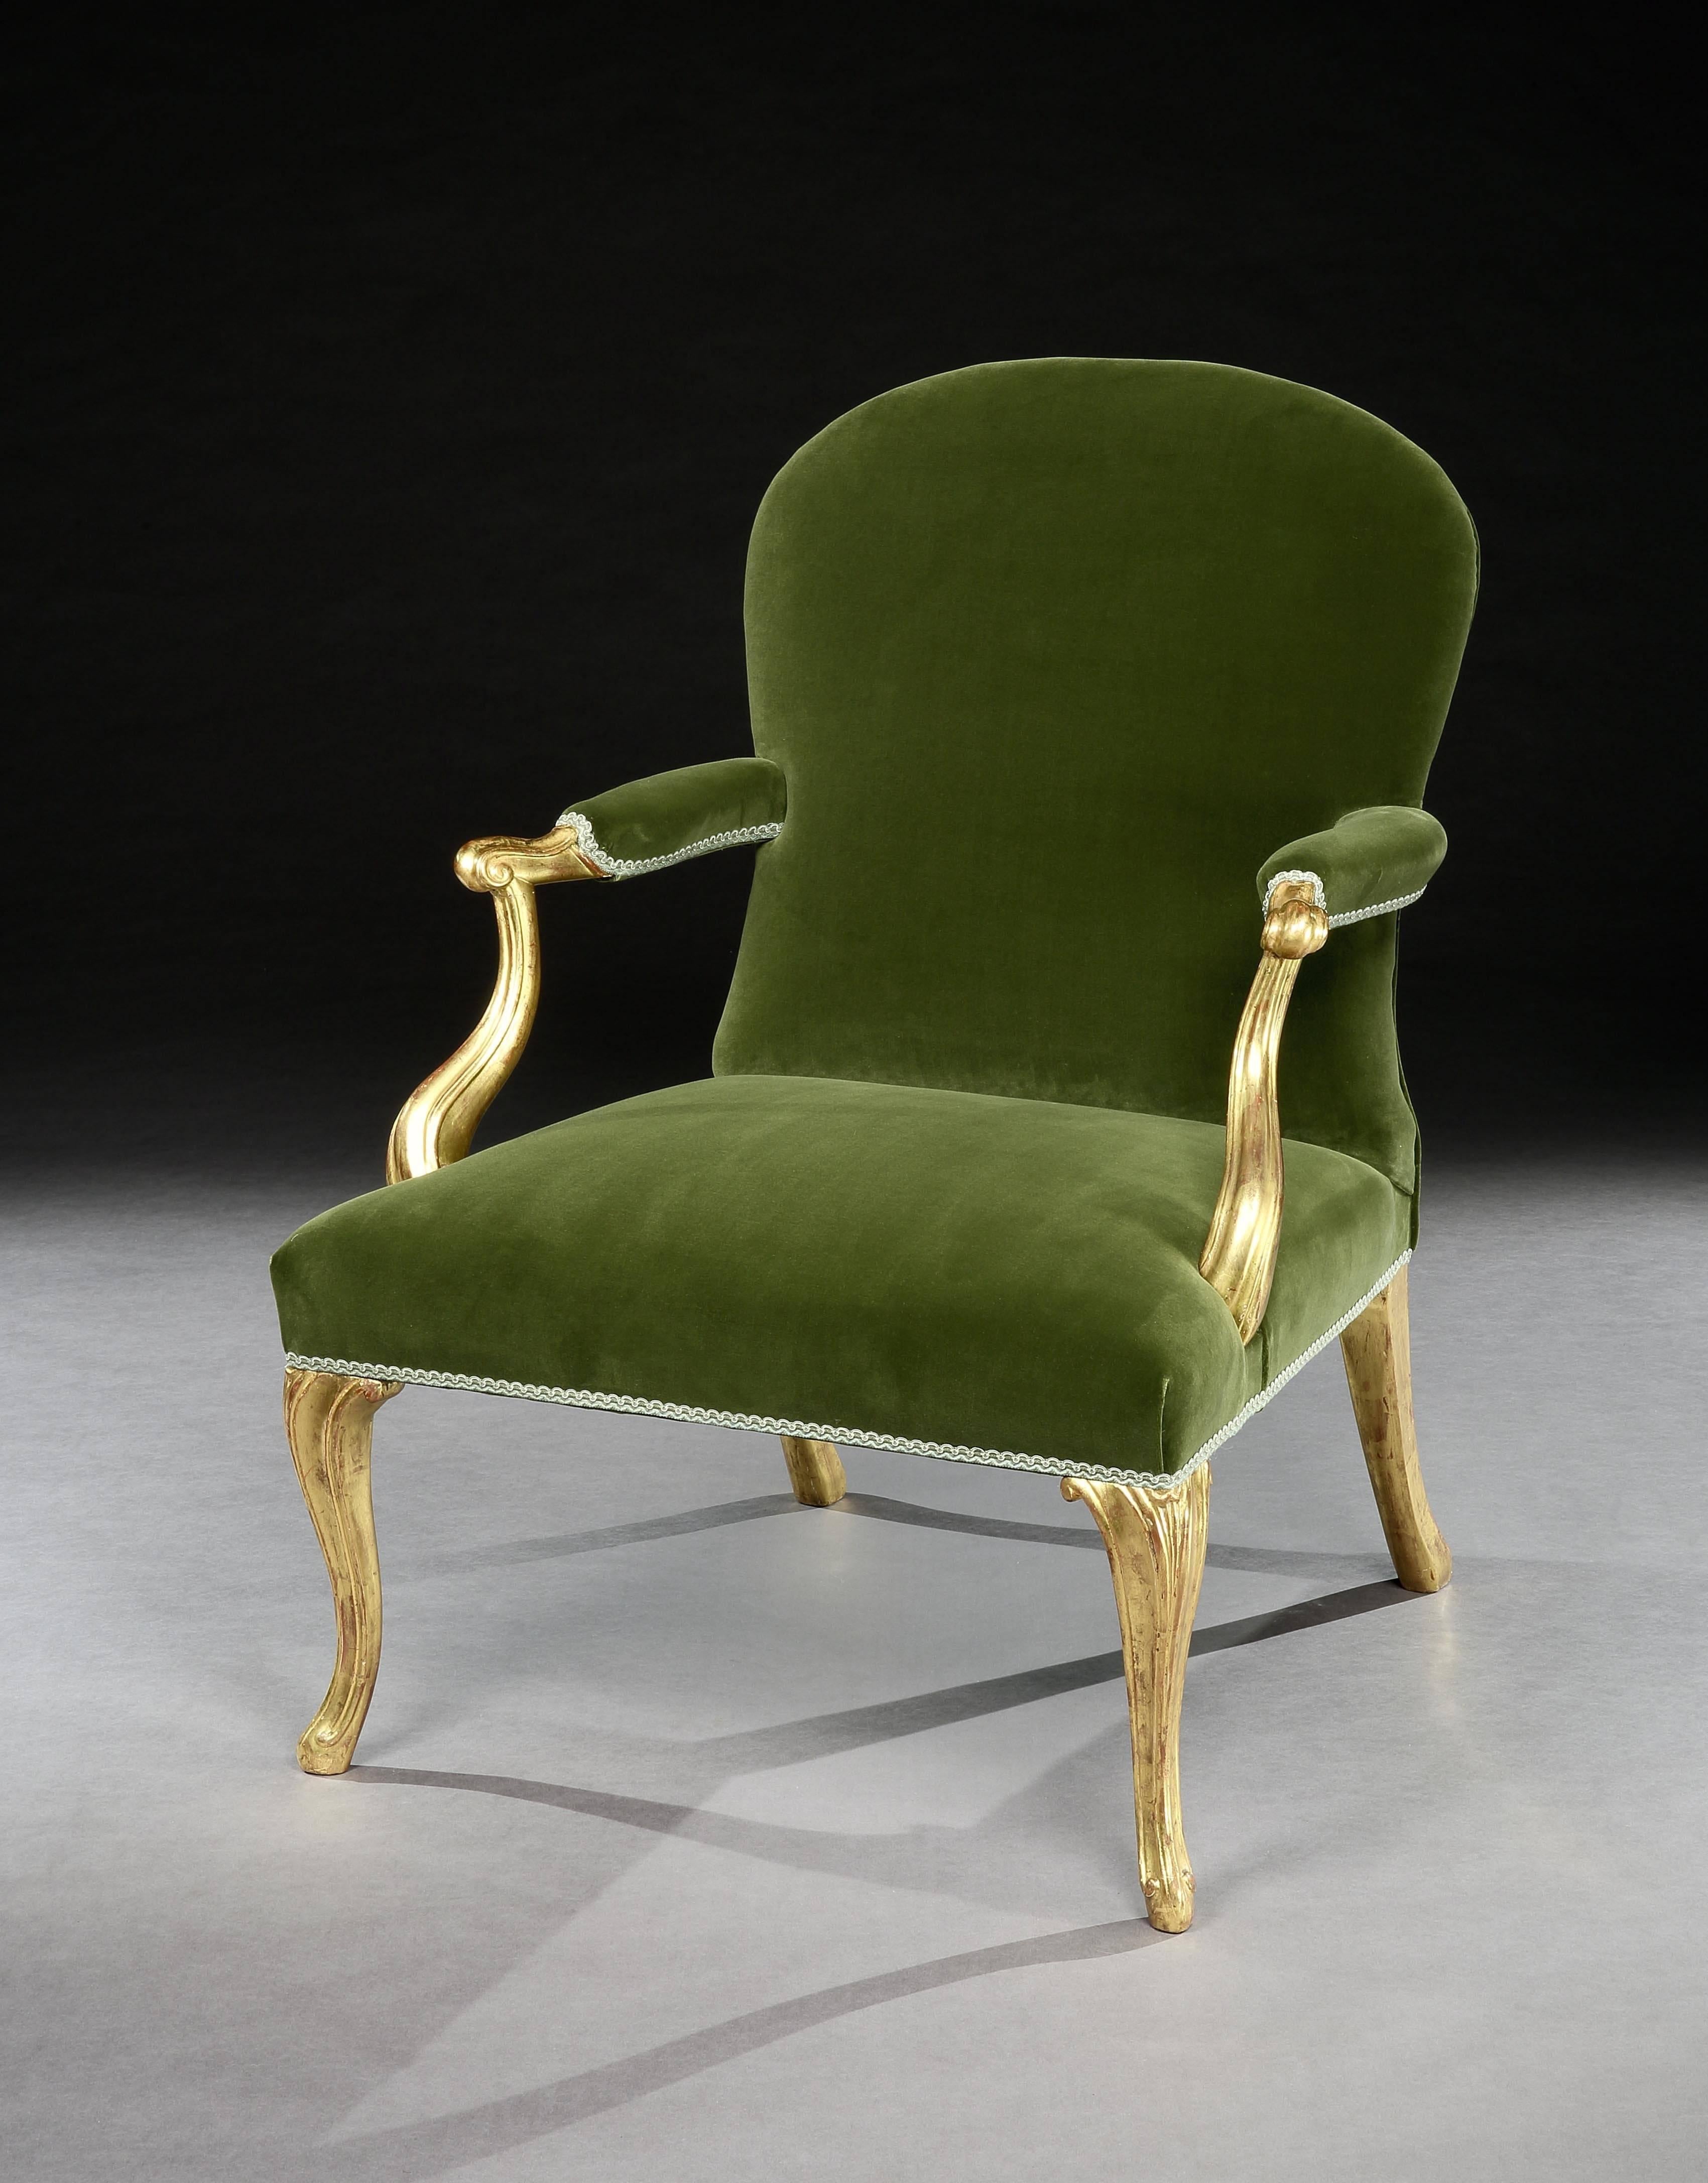 A very fine George III giltwood armchair, the padded back and seat upholstered in light green damask.